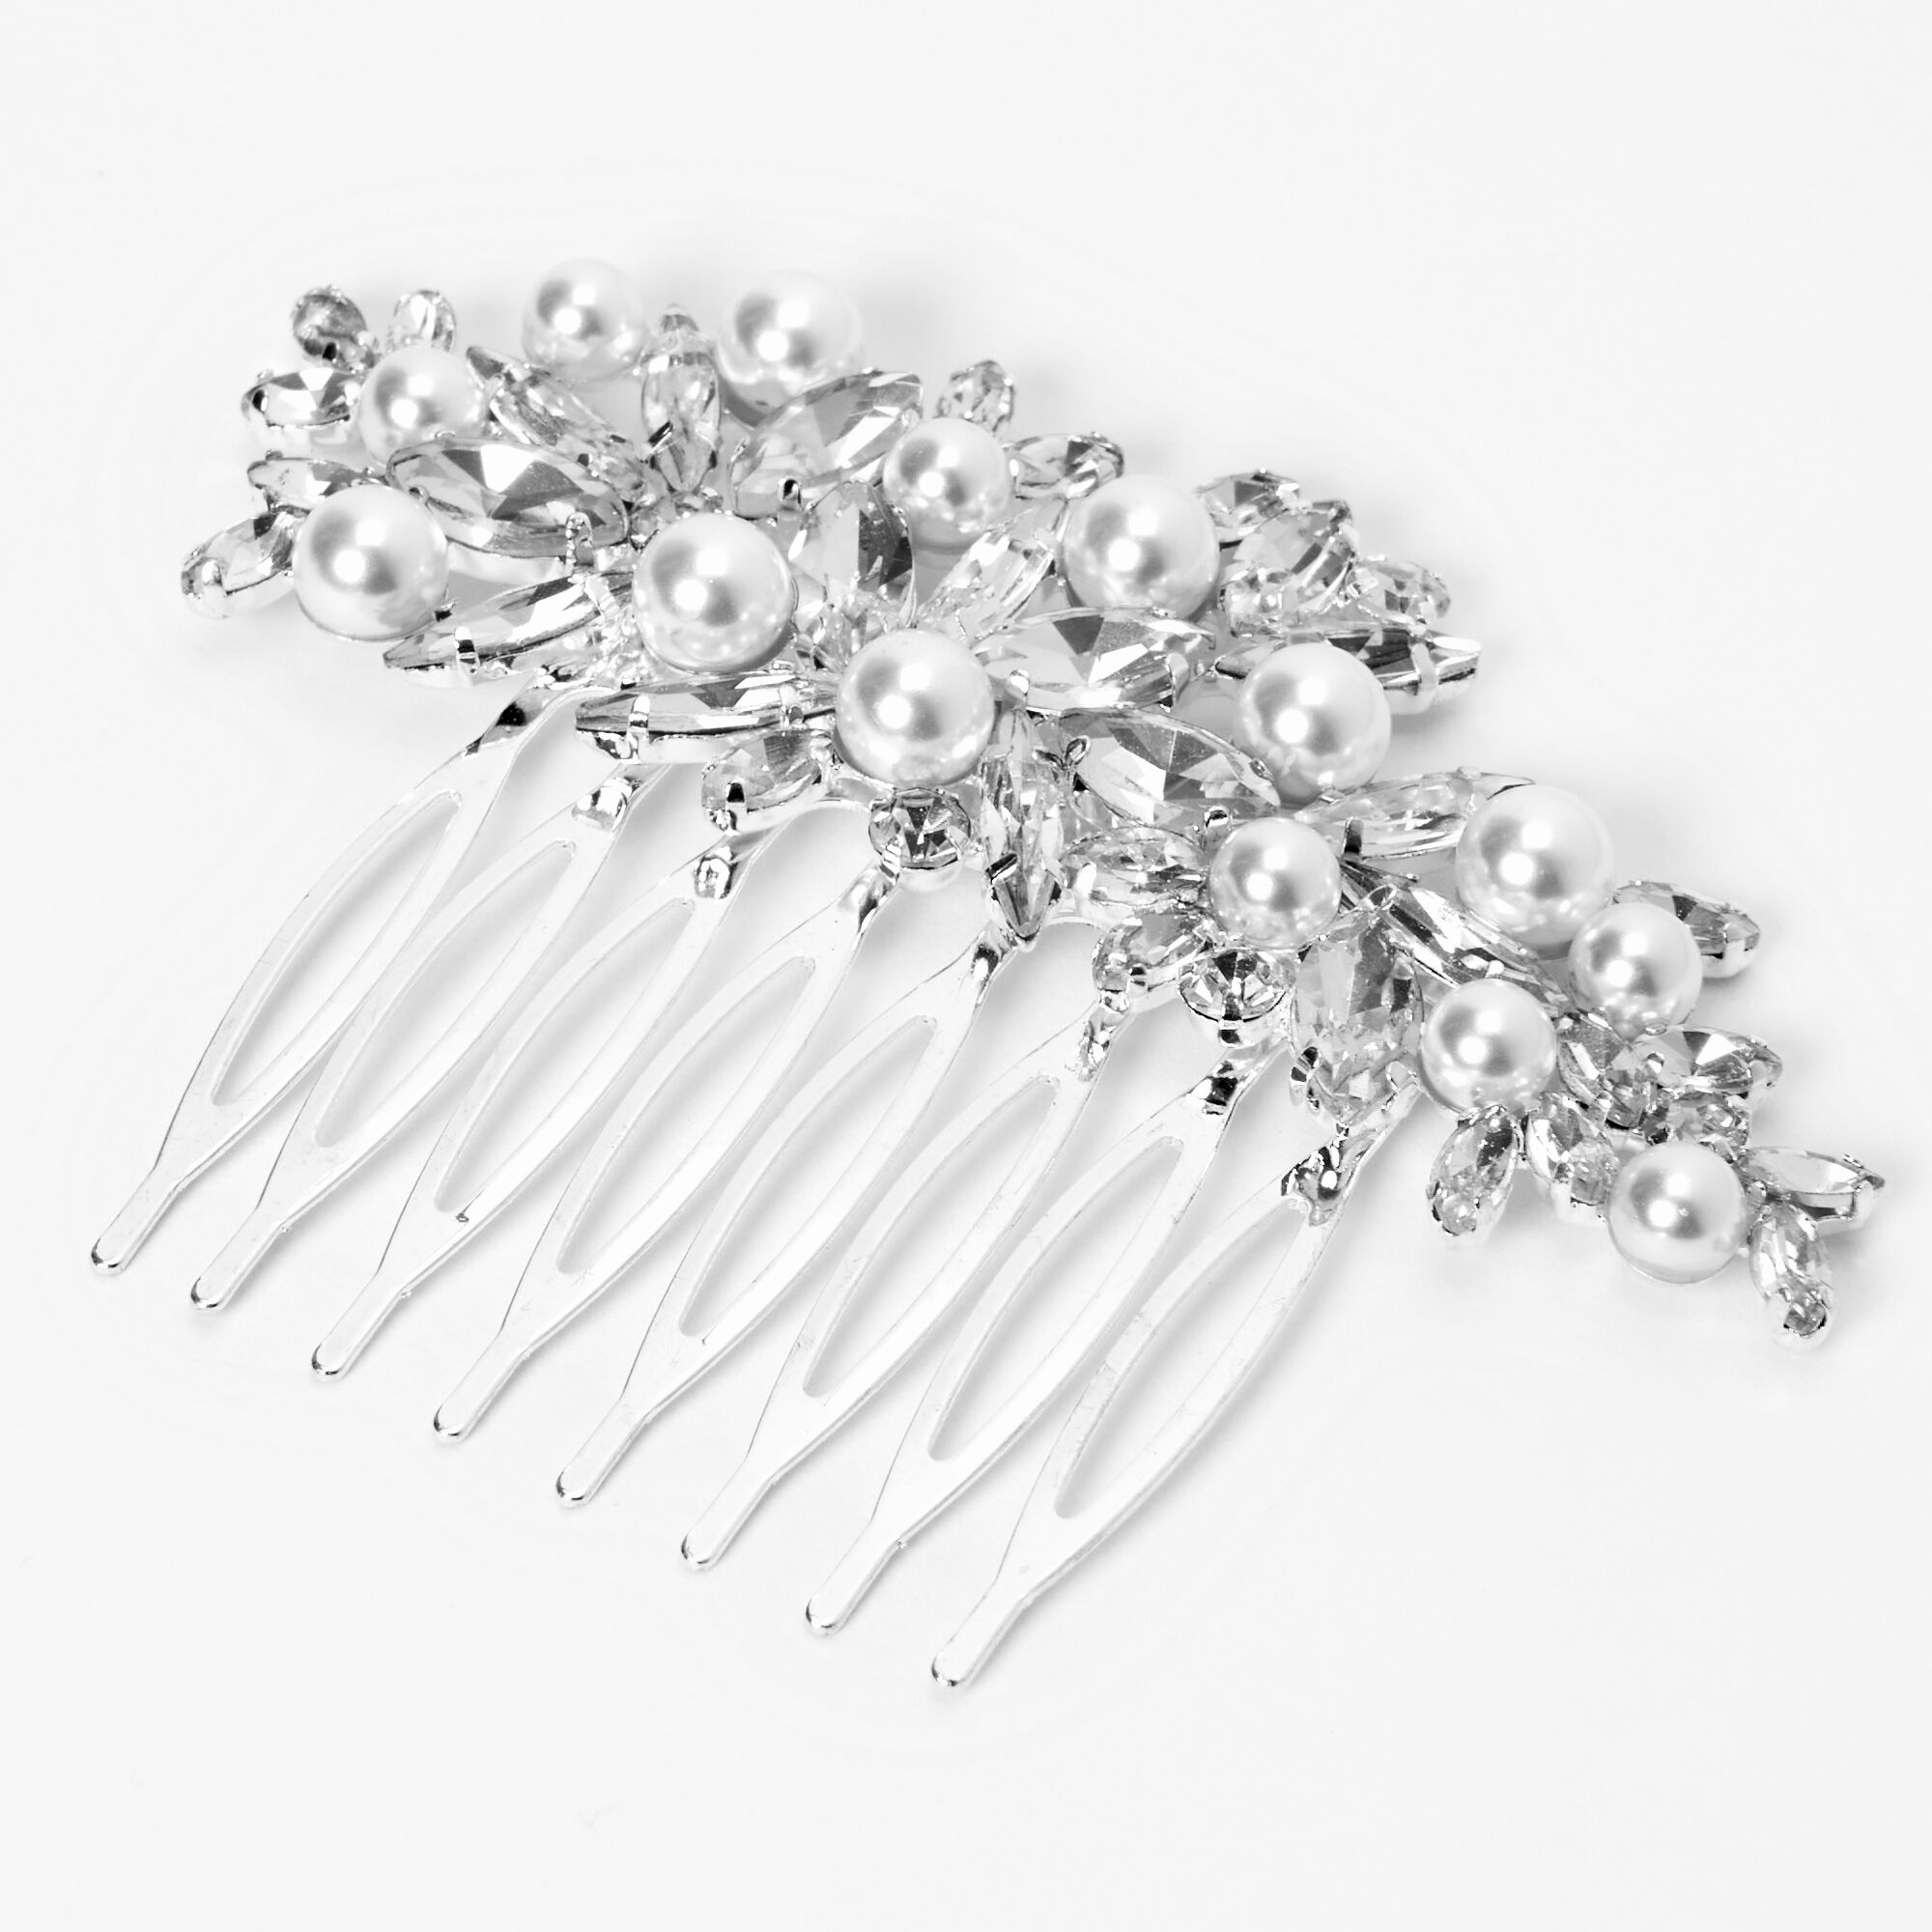 View Claires Tone Rhinestone Pearl Petal Hair Comb Silver information